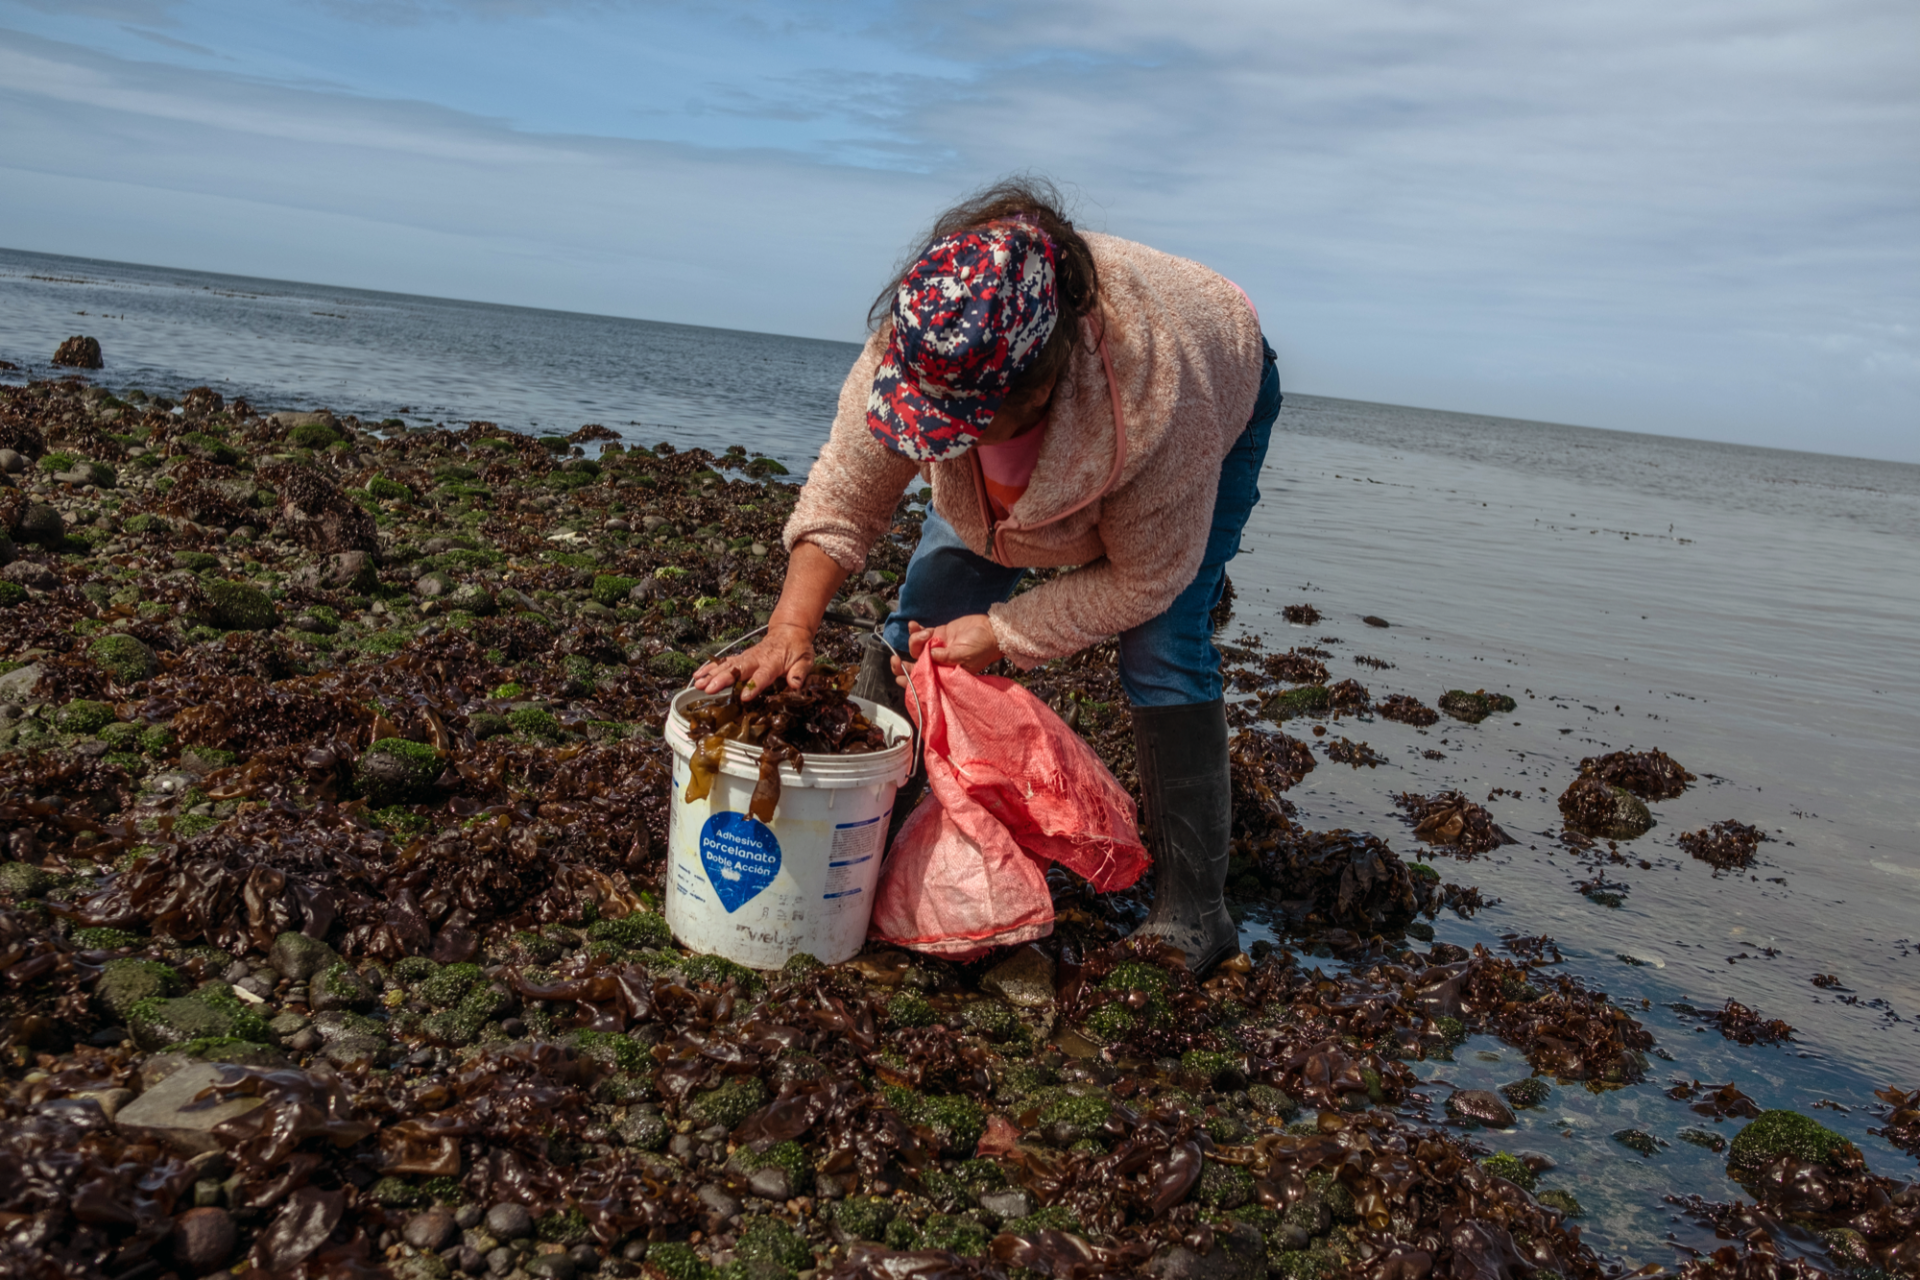 A woman collects seaweed near the town of Ilque on February 26, 2023. (Photo: Cristobal Venegas)